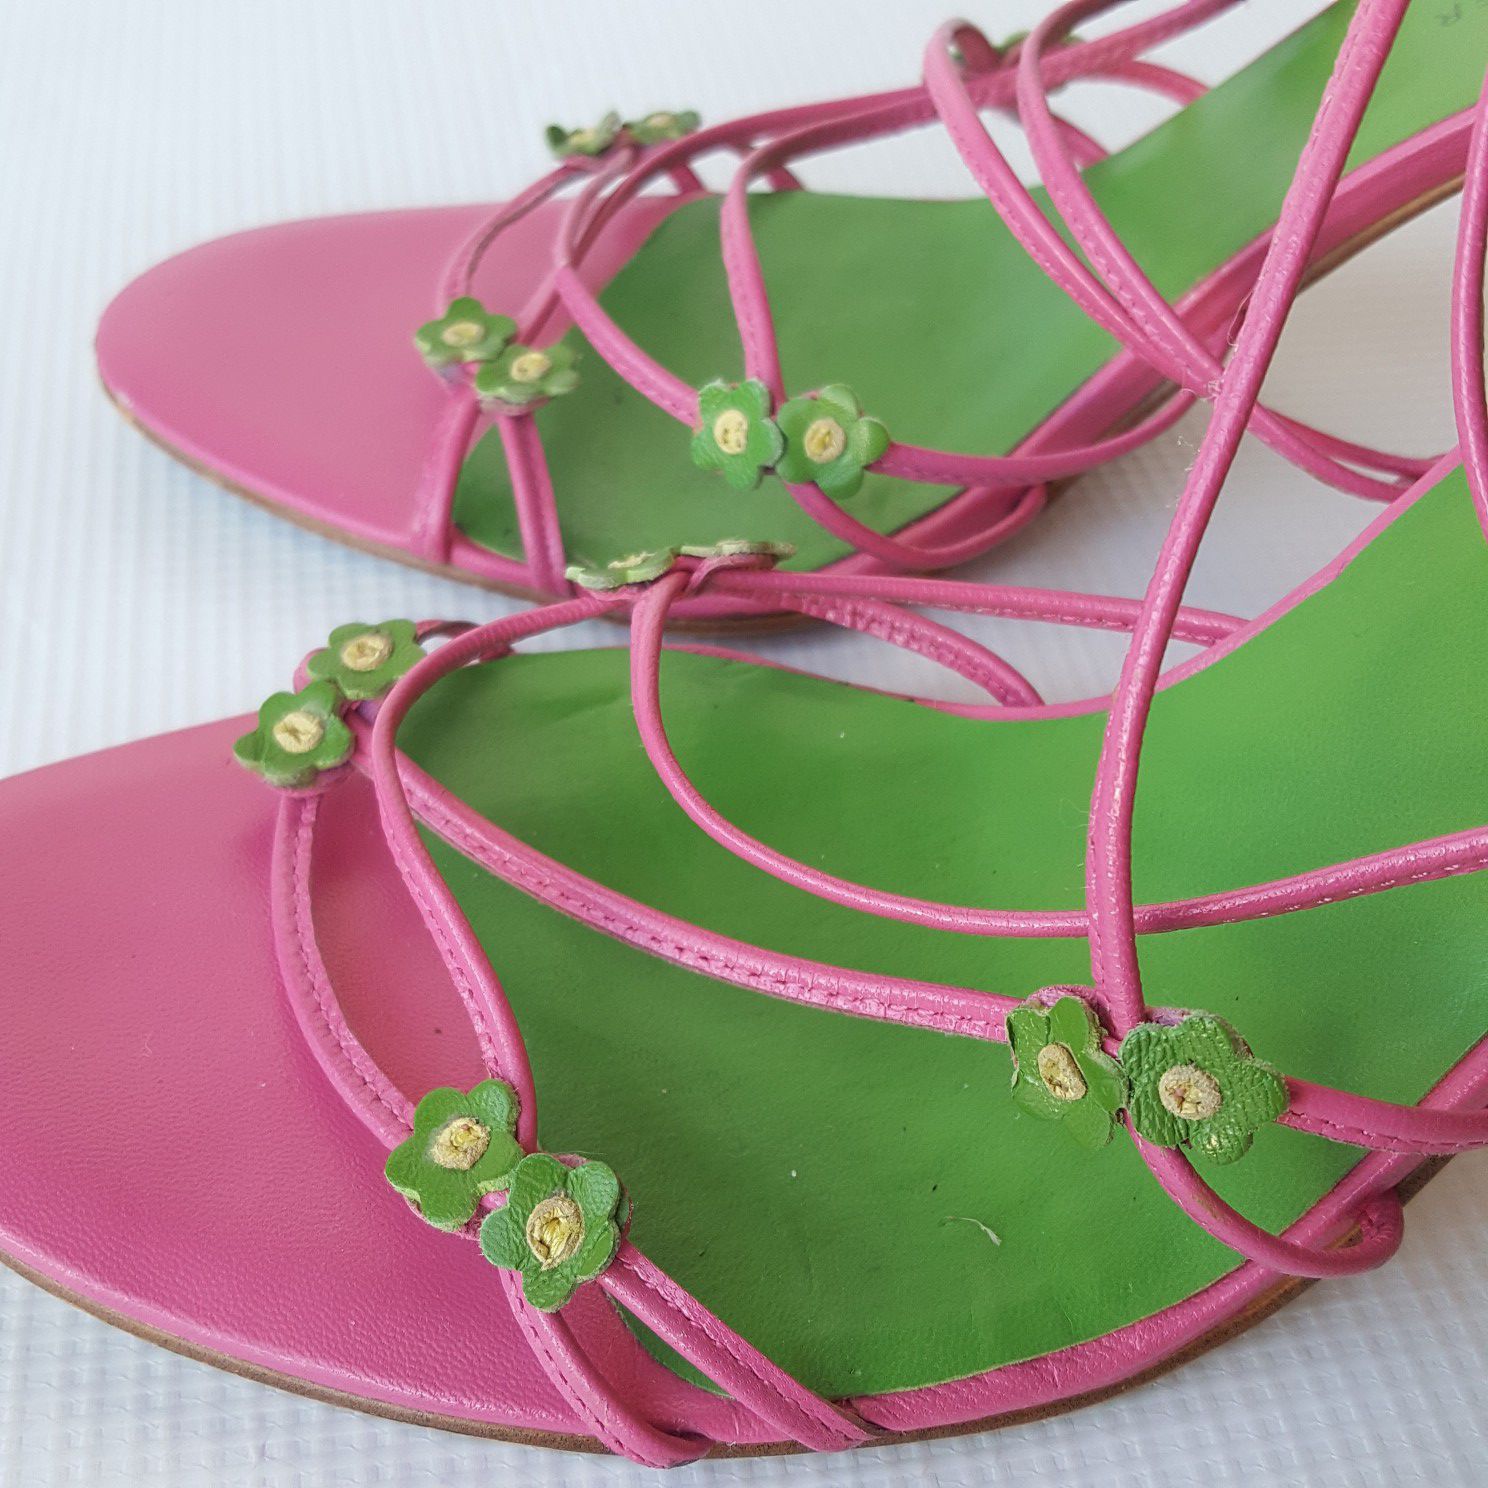 Tommy Hilfiger Pink/Green Floral Strappy Sandals Size 8.5M for Sale in Las Vegas, NV - OfferUp